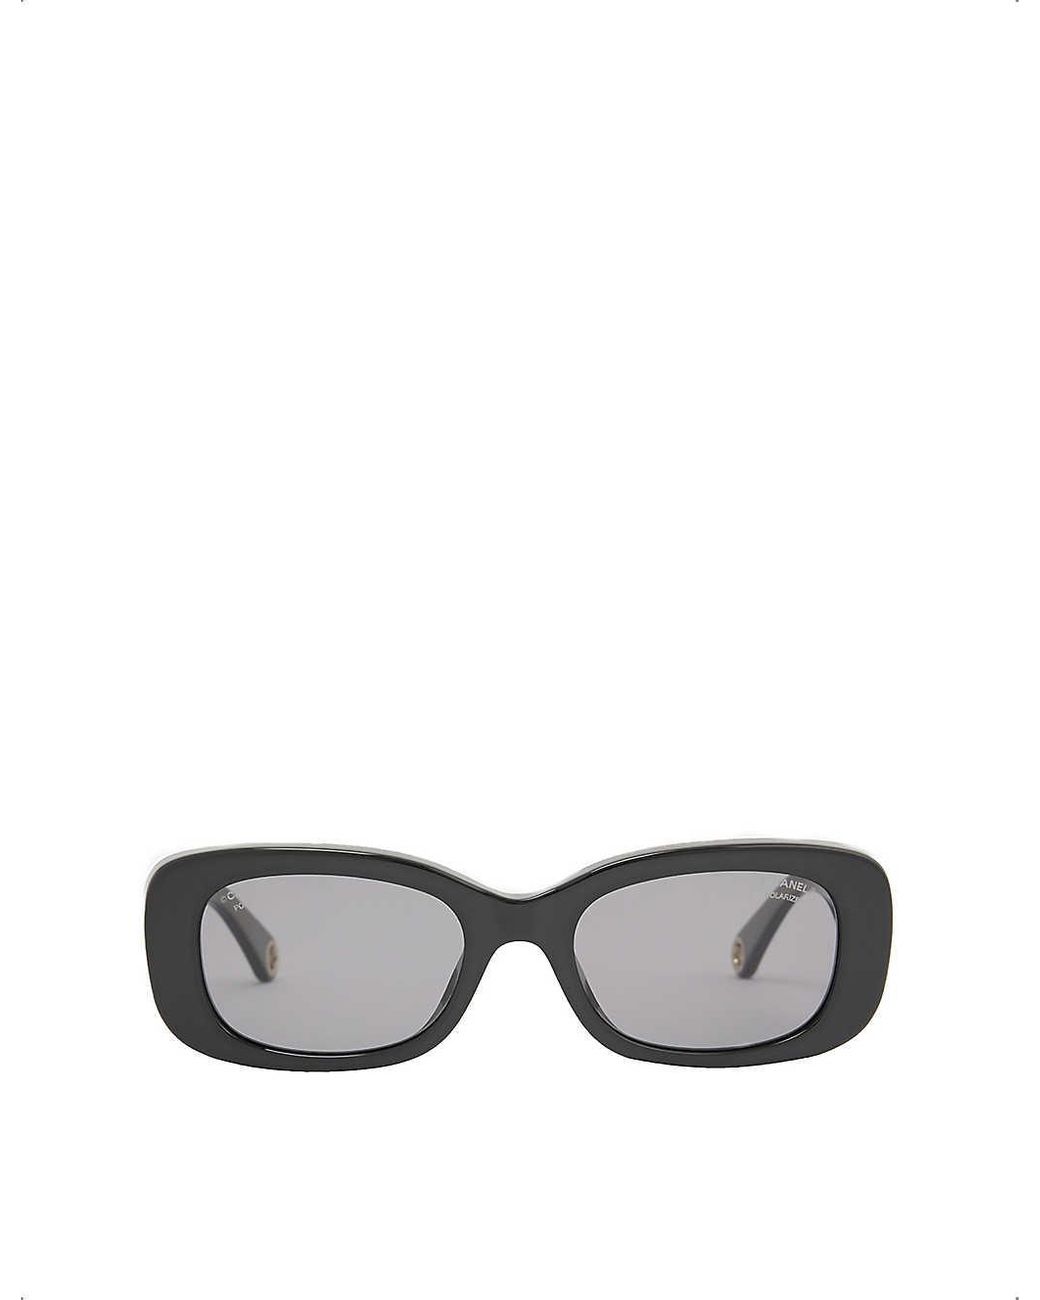 Chanel Ch5488 Rectangular-frame Brand-plaque Acetate Sunglasses in Gray ...